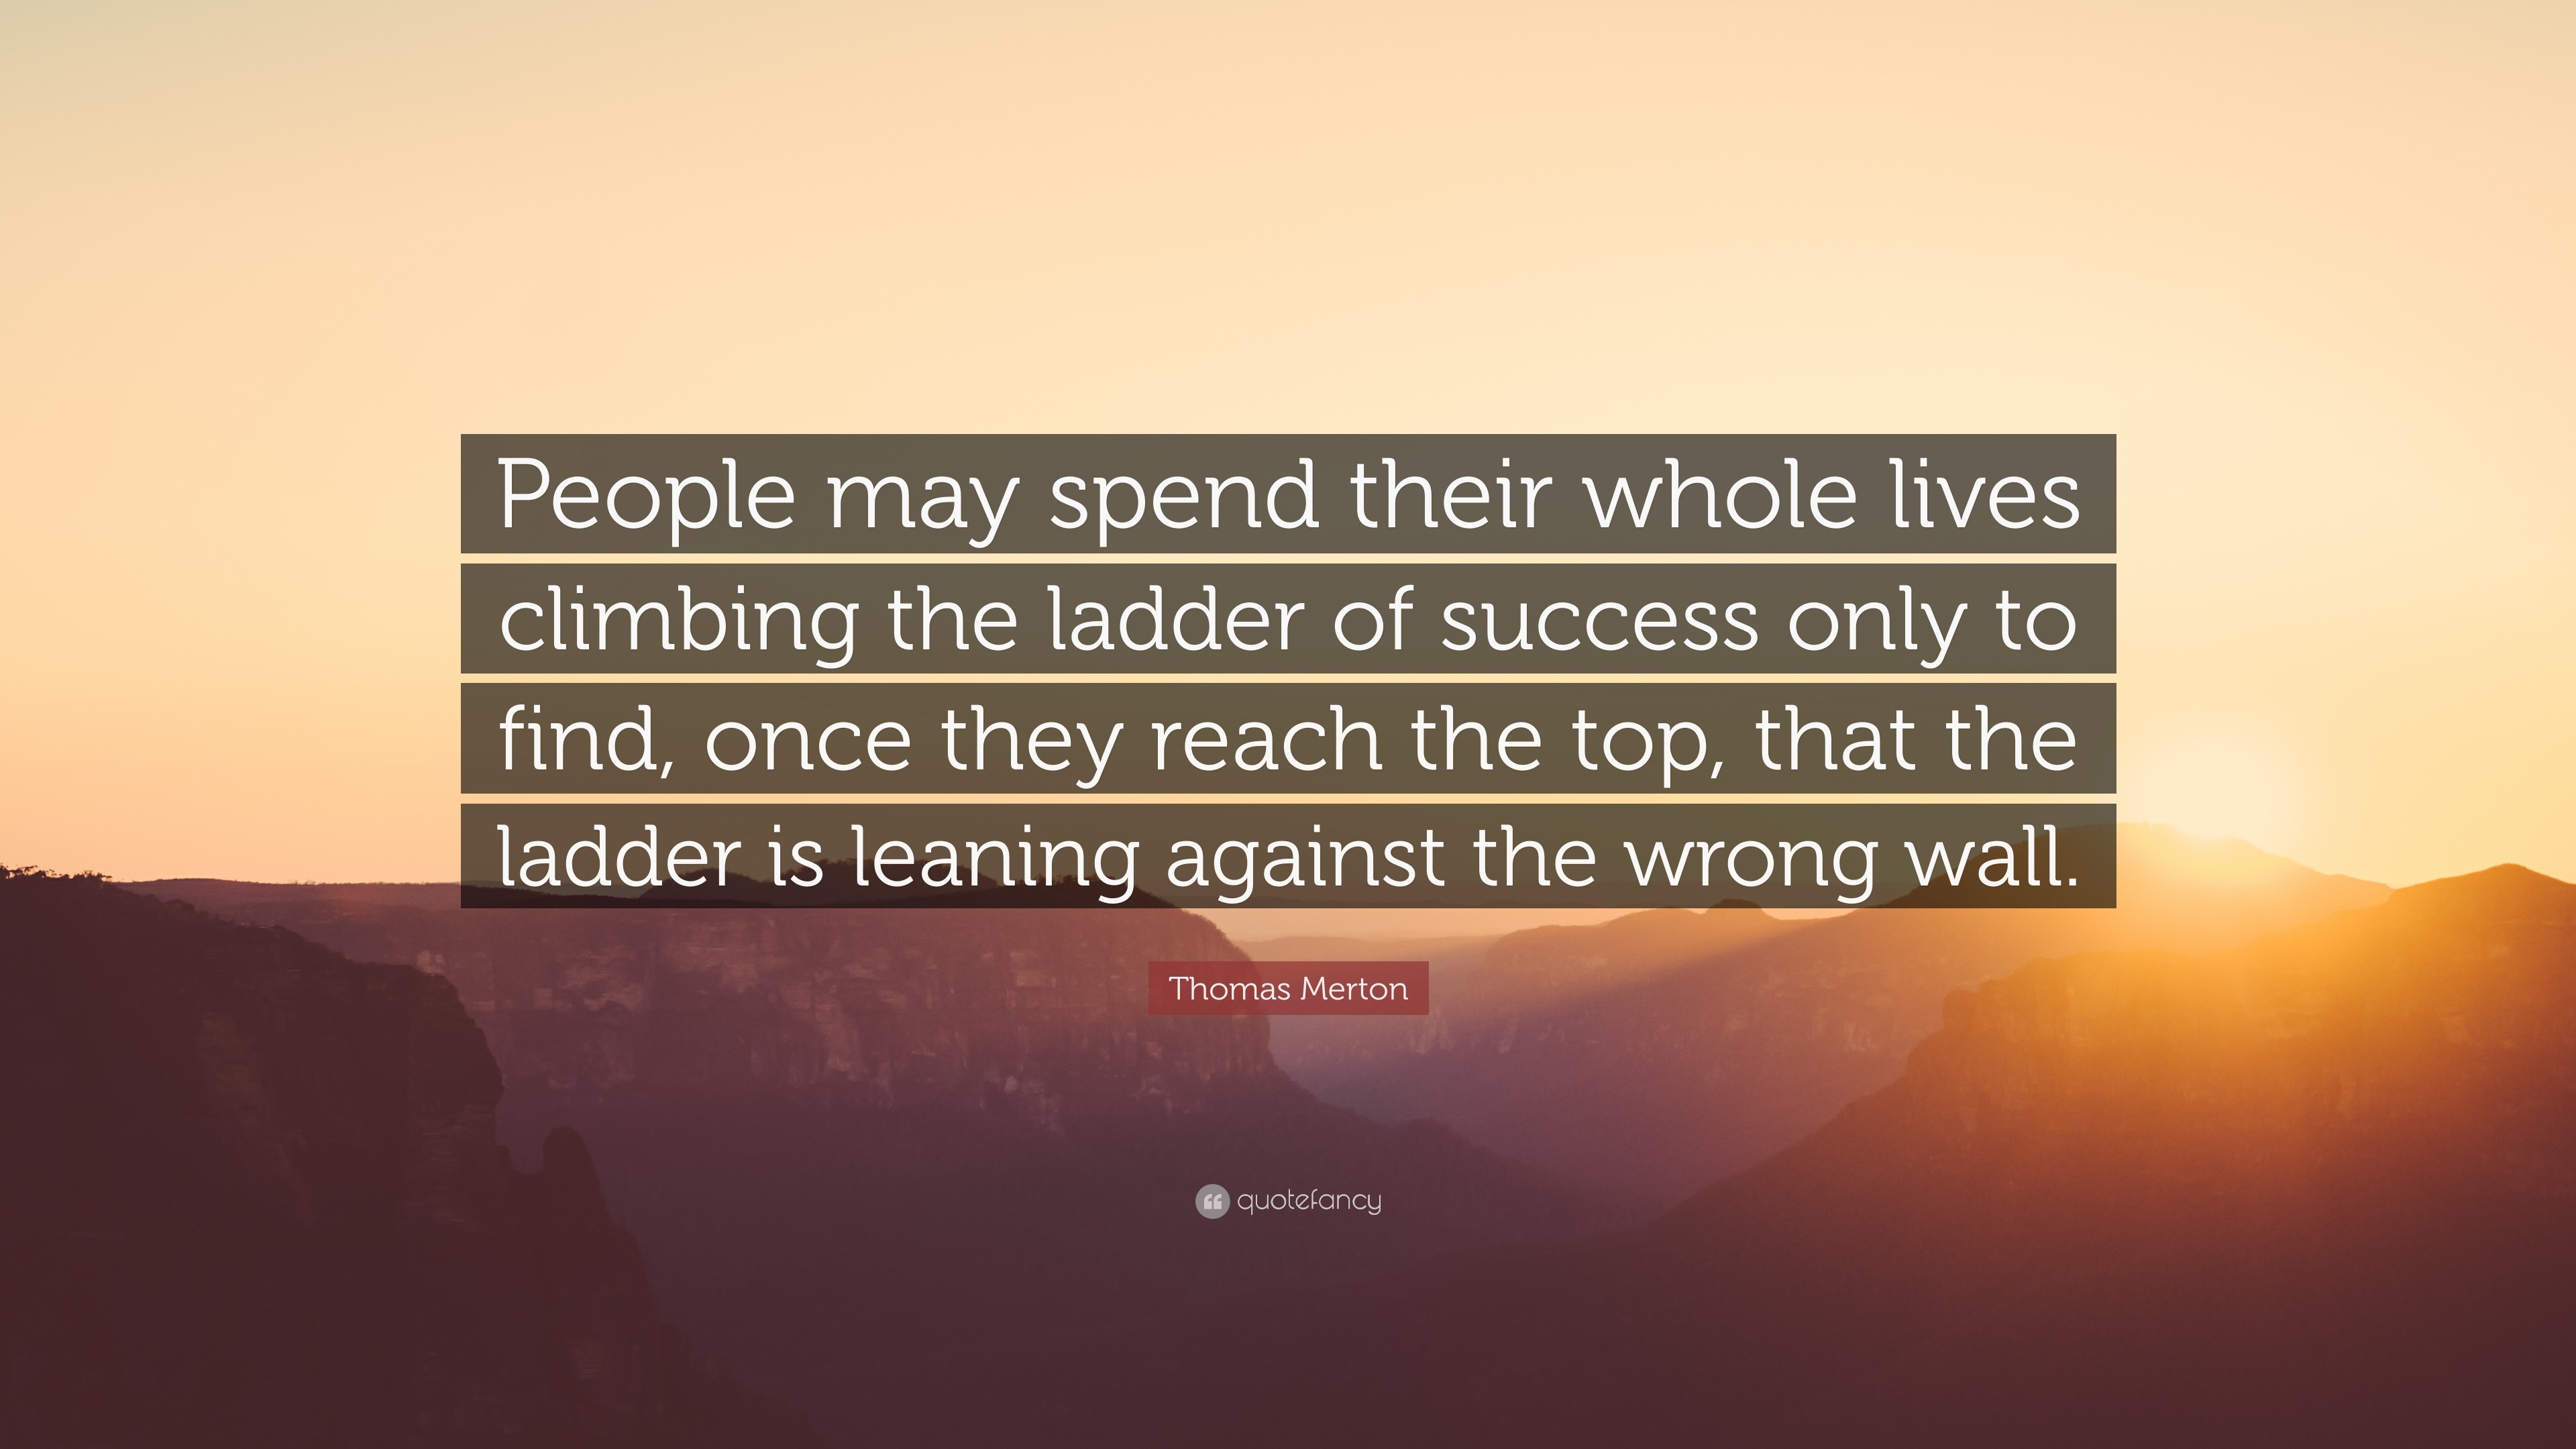 Thomas Merton Quote: “People may spend their whole lives climbing the